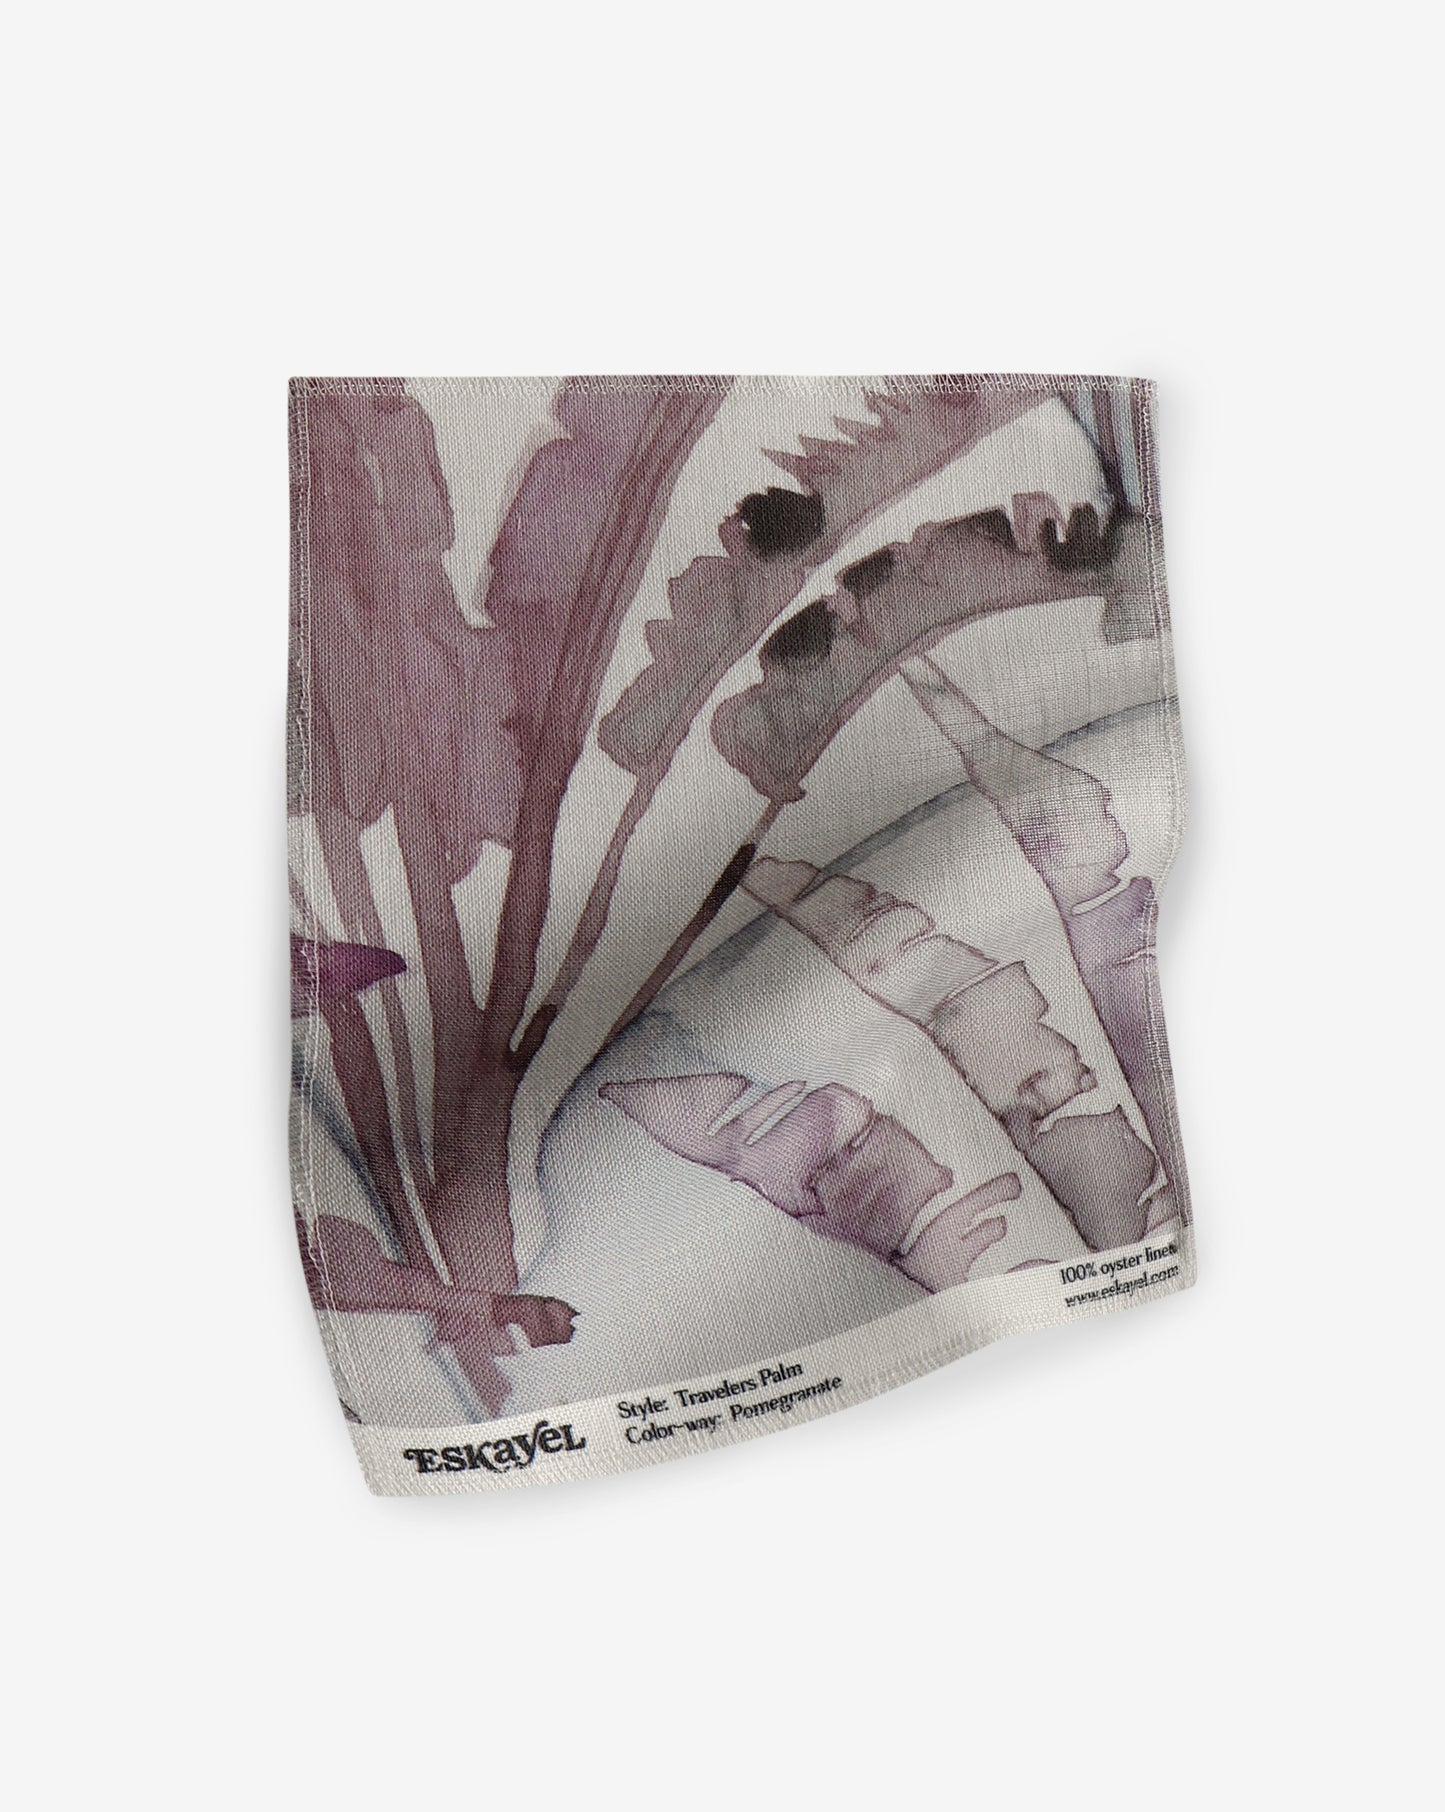 A luxury Travelers Palm Fabric hand fabric with a purple and white pattern on it